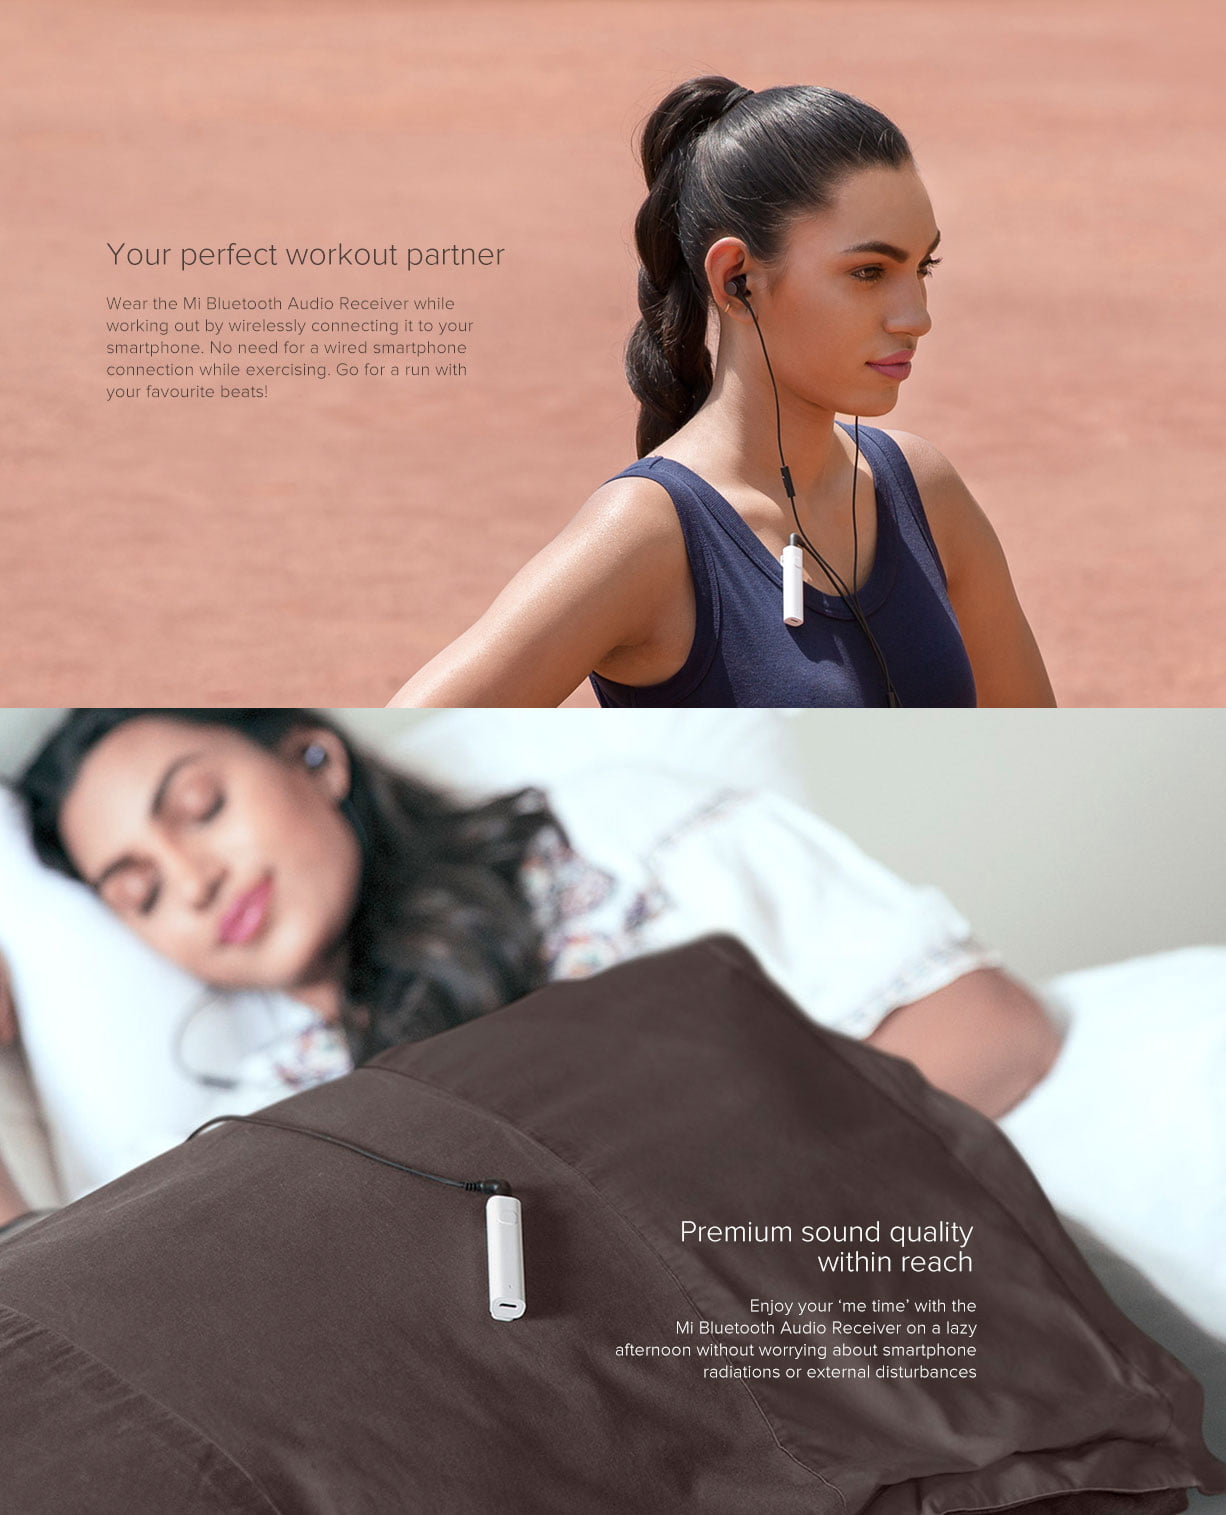 Your perfect workout partner Wear the Mi Bluetooth Audio Receiver while working out by wirelessly connecting it to your smartphone. No need for a wired smartphone connection while exercising. GO for a run with your favorite beats!